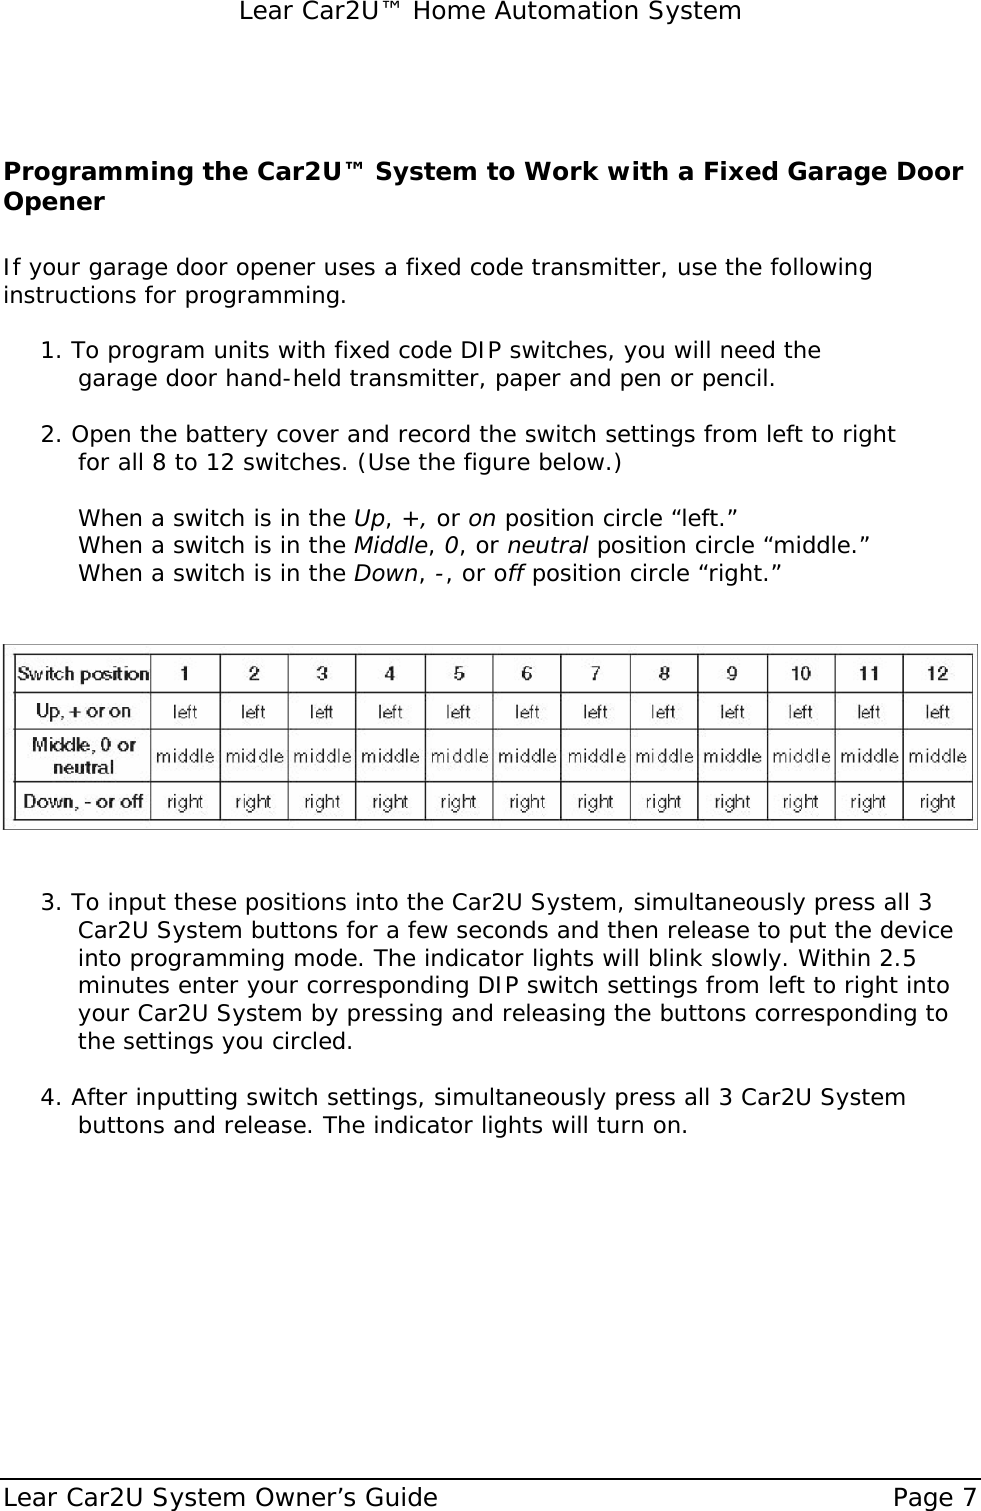   Lear Car2U™ Home Automation System Lear Car2U System Owner’s Guide    Page 7    Programming the Car2U™ System to Work with a Fixed Garage Door Opener  If your garage door opener uses a fixed code transmitter, use the following instructions for programming.  1. To program units with fixed code DIP switches, you will need the    garage door hand-held transmitter, paper and pen or pencil.  2. Open the battery cover and record the switch settings from left to right   for all 8 to 12 switches. (Use the figure below.)     When a switch is in the Up, +, or on position circle “left.”   When a switch is in the Middle, 0, or neutral position circle “middle.”   When a switch is in the Down, -, or off position circle “right.”                    3. To input these positions into the Car2U System, simultaneously press all 3 Car2U System buttons for a few seconds and then release to put the device into programming mode. The indicator lights will blink slowly. Within 2.5 minutes enter your corresponding DIP switch settings from left to right into your Car2U System by pressing and releasing the buttons corresponding to the settings you circled.  4. After inputting switch settings, simultaneously press all 3 Car2U System buttons and release. The indicator lights will turn on.   